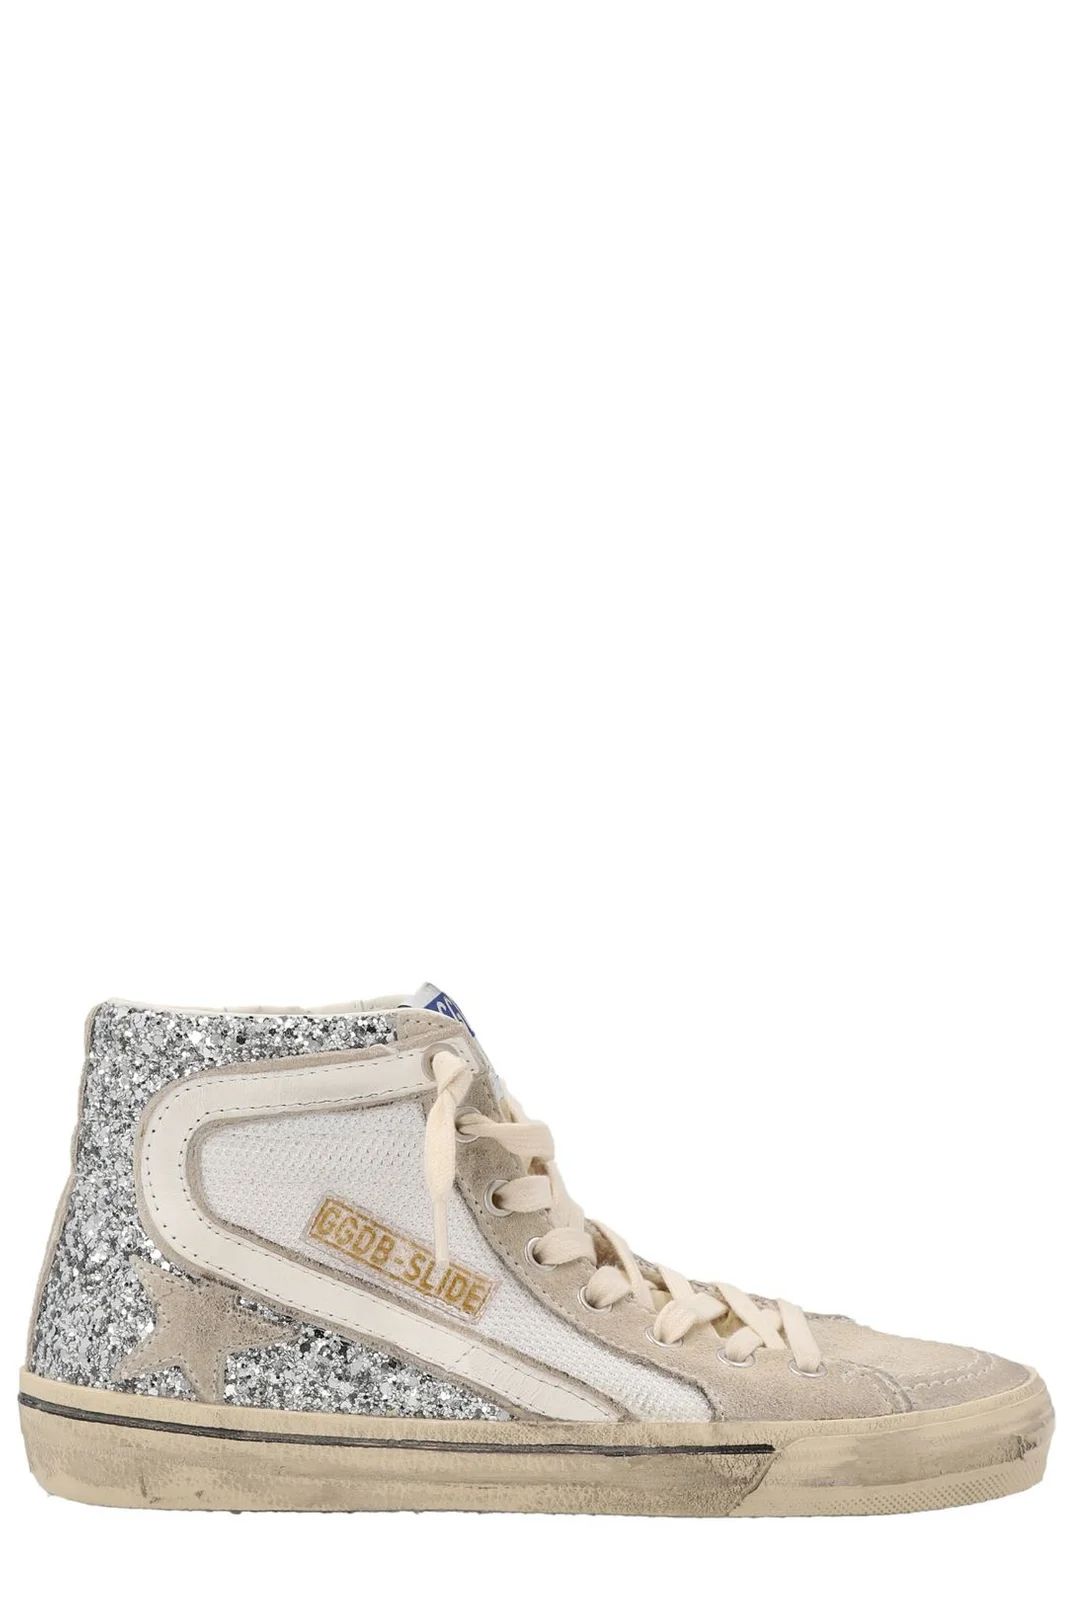 Golden Goose Deluxe Brand Embellished Lace-Up Sneakers | Cettire Global